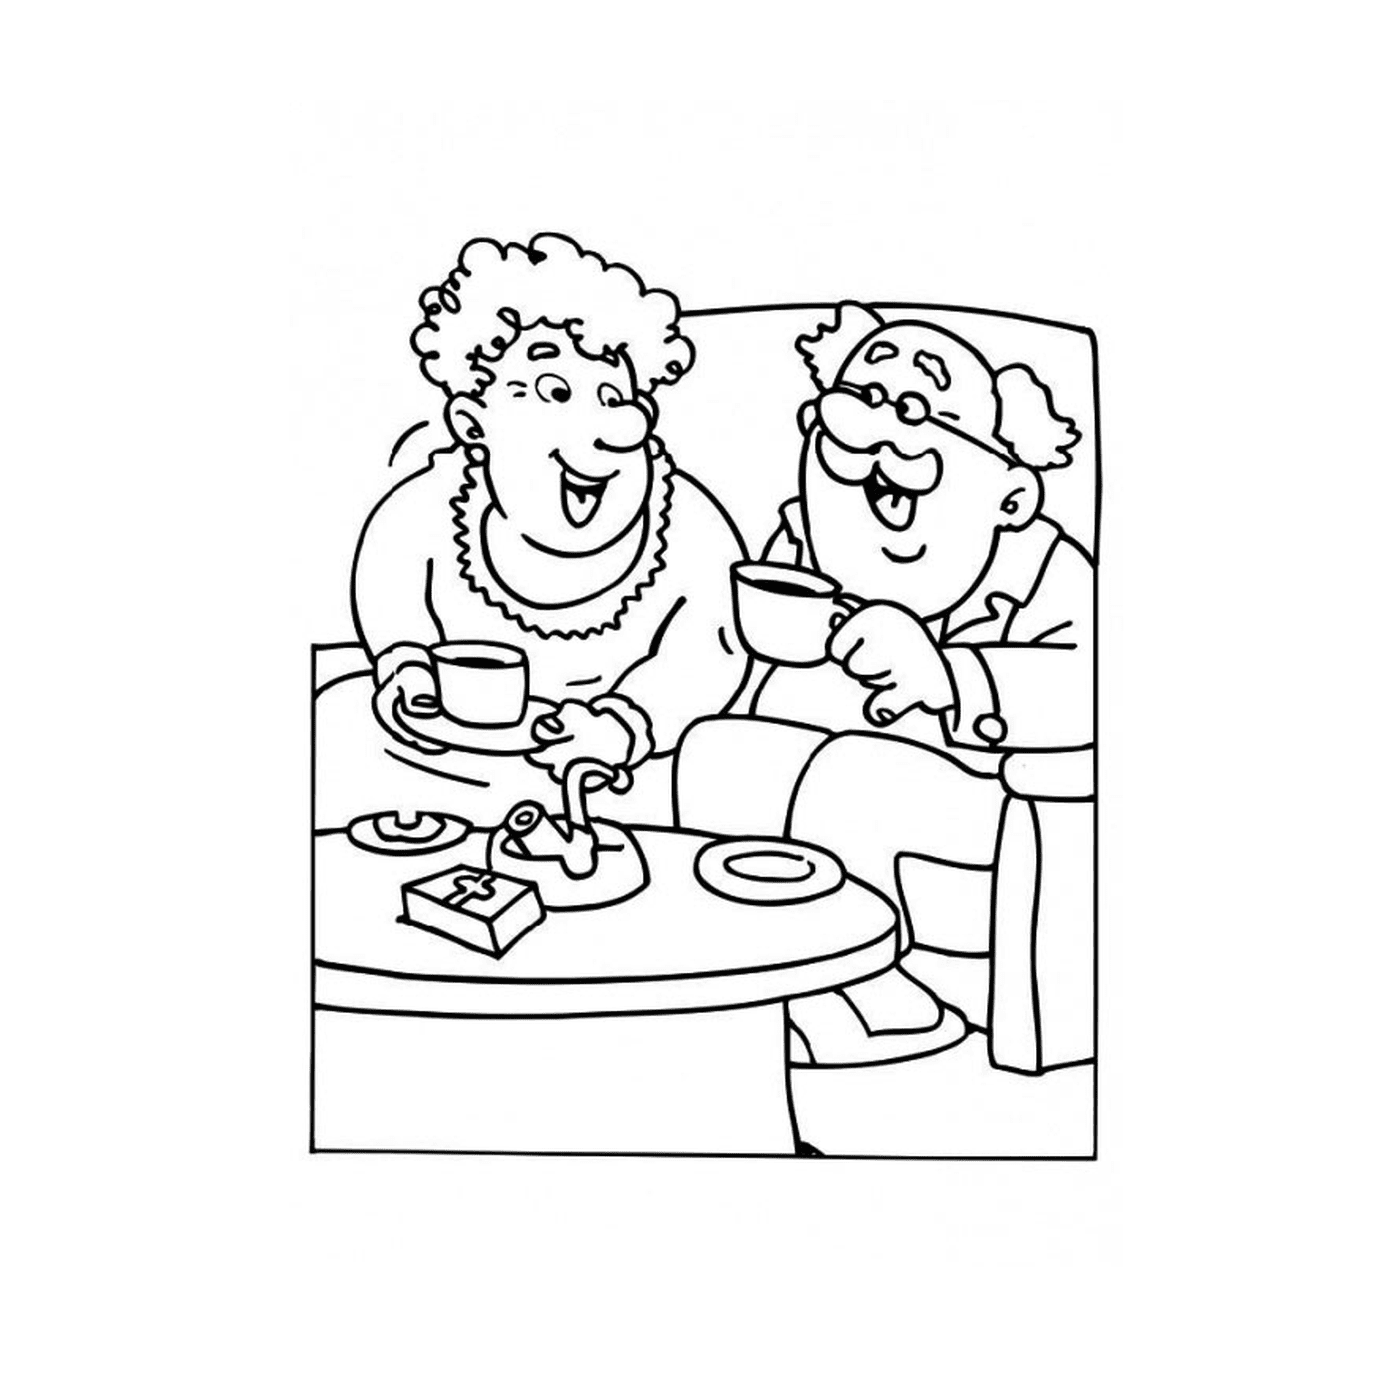  A man and a woman drinking tea 